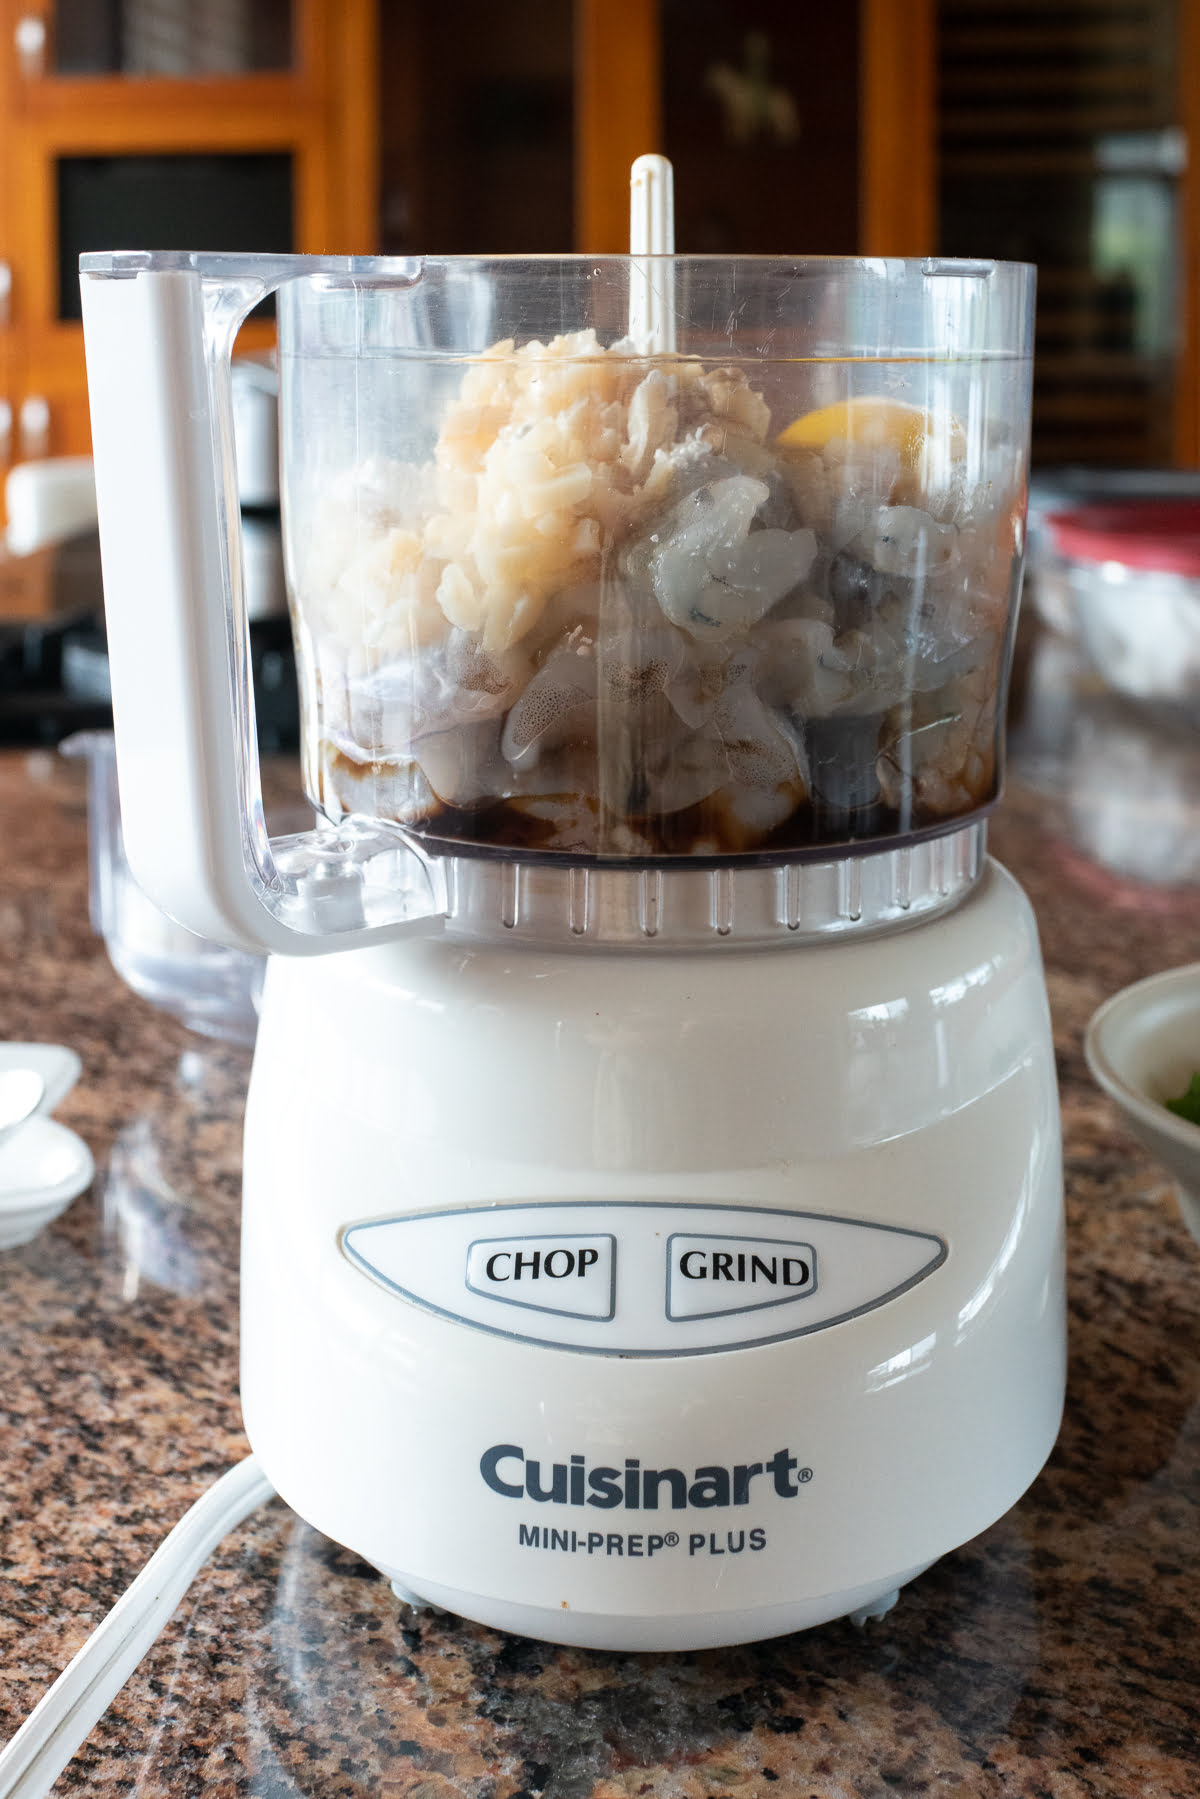 Blending all the Shrimp Toast ingredients in the food processor.